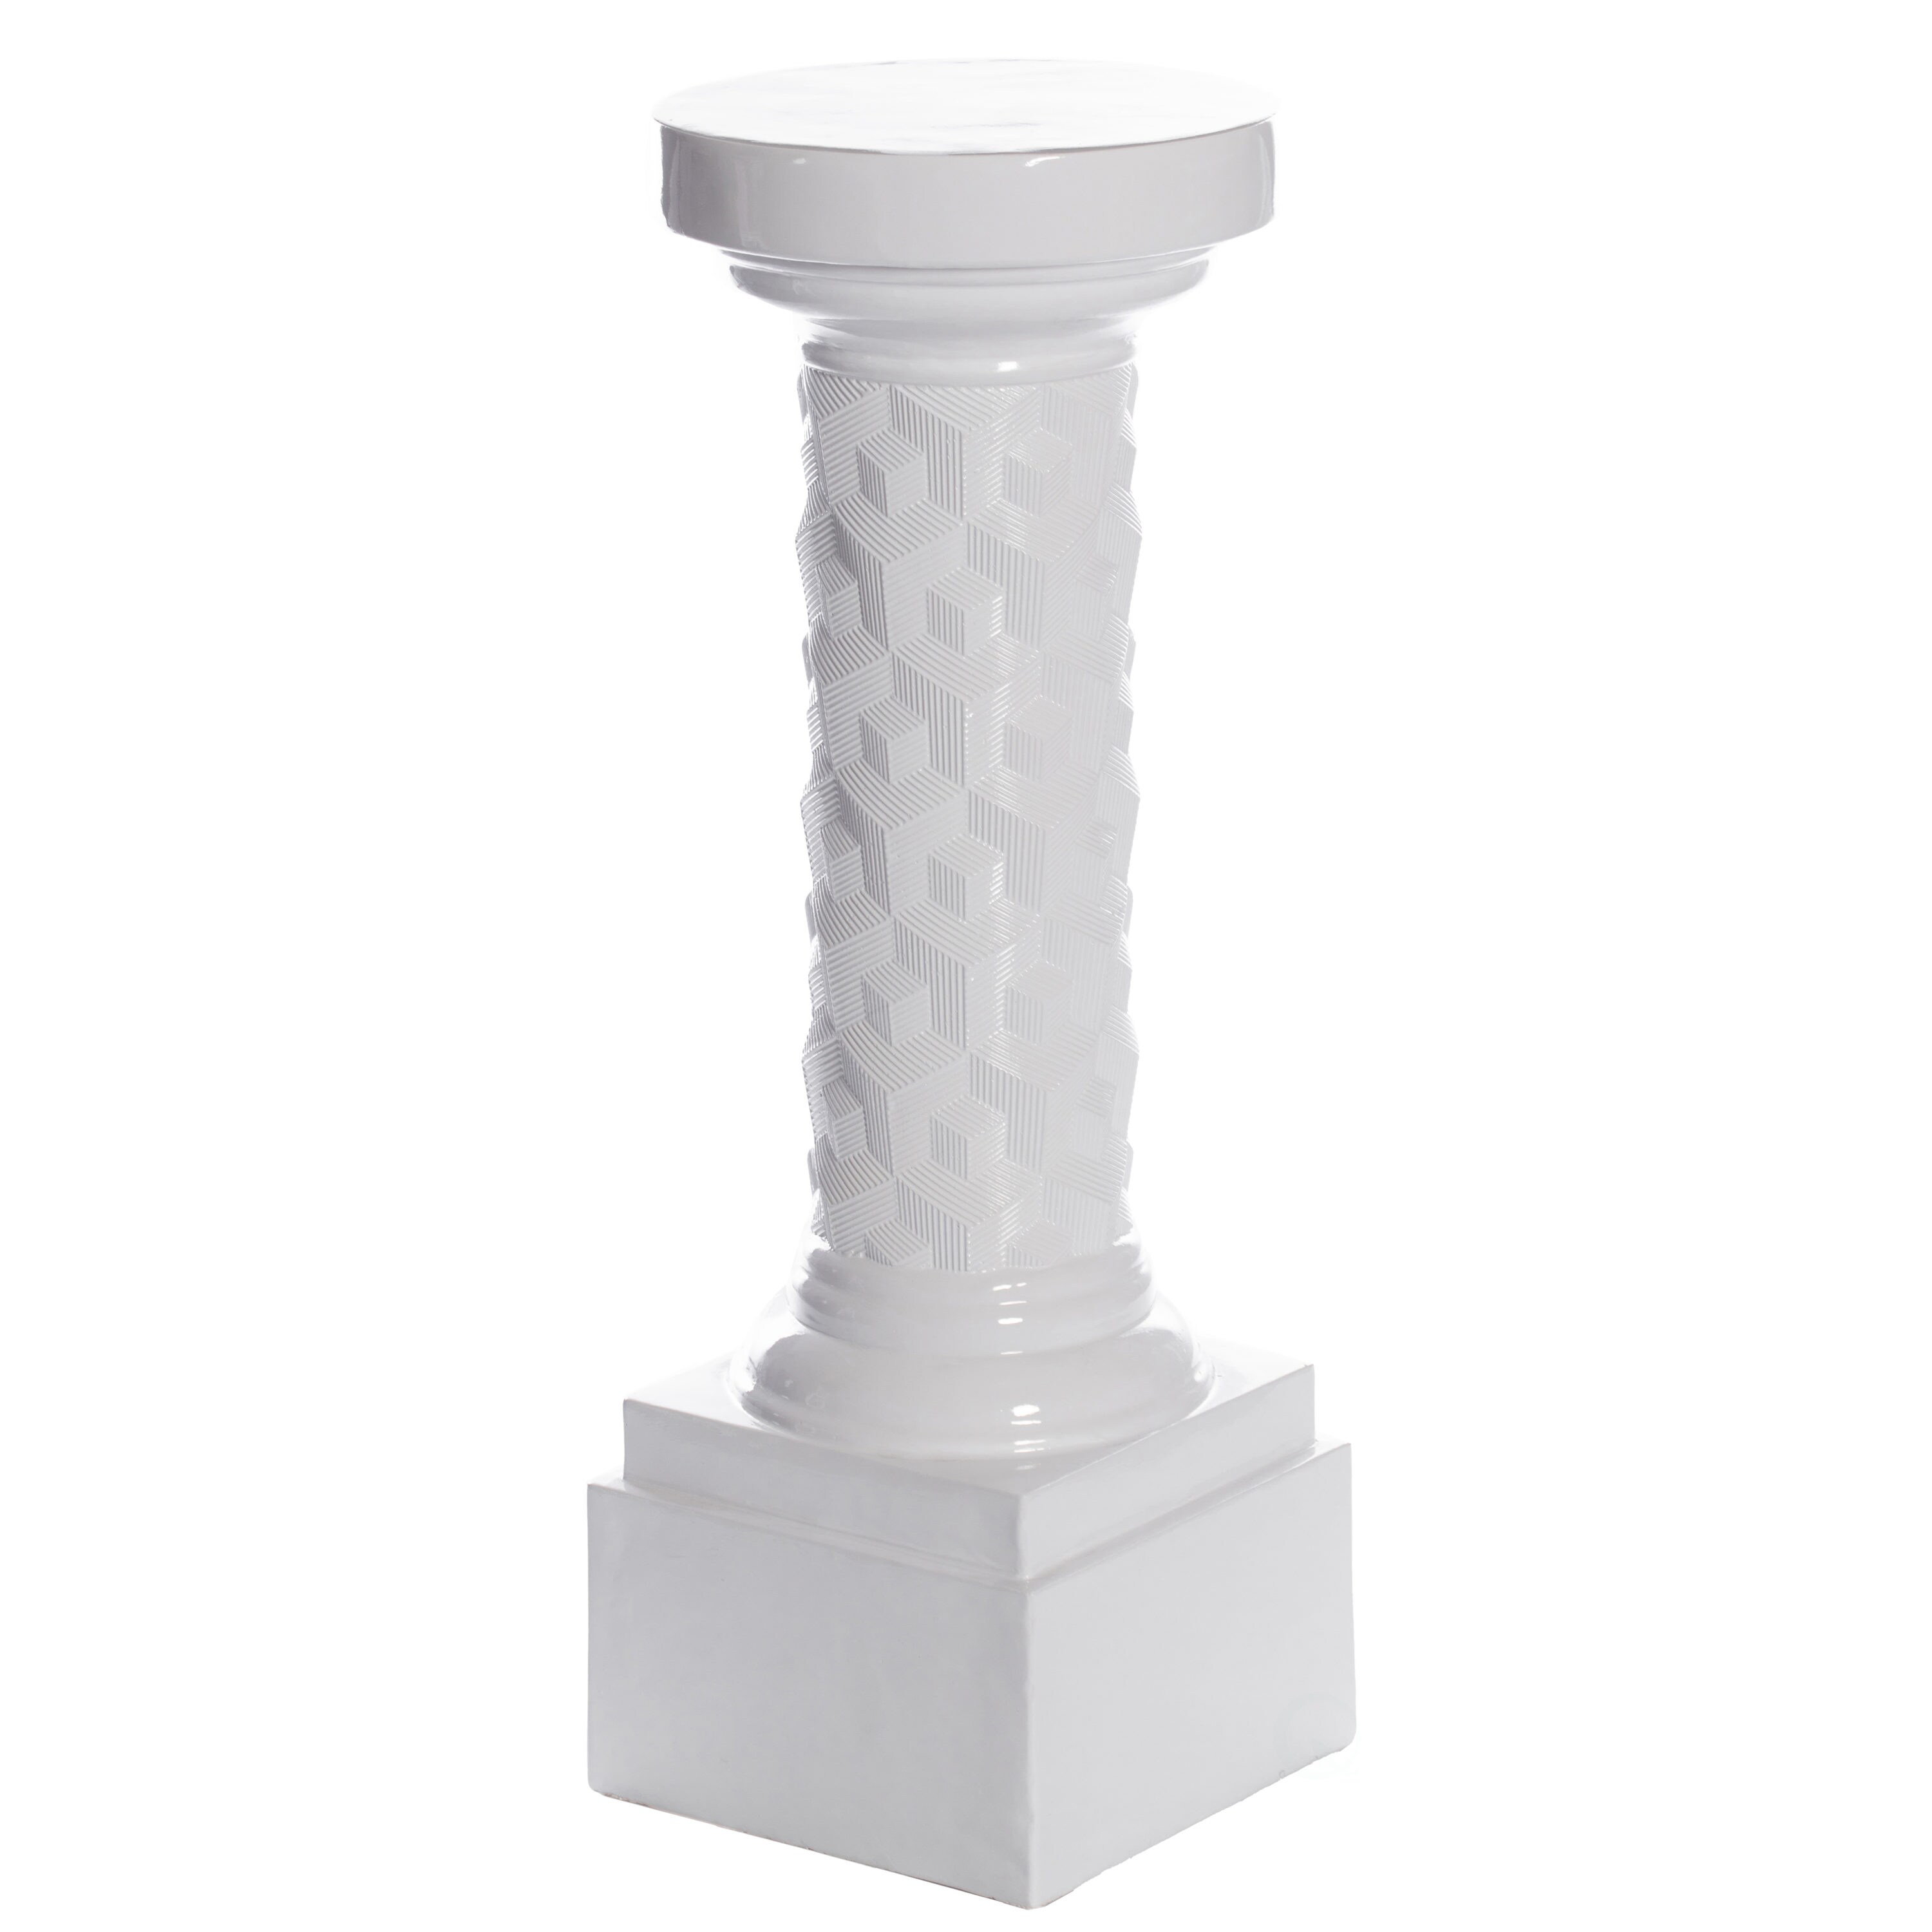 Pedestal Column for Plants Flowers and Embellishments Wooden White more measures 